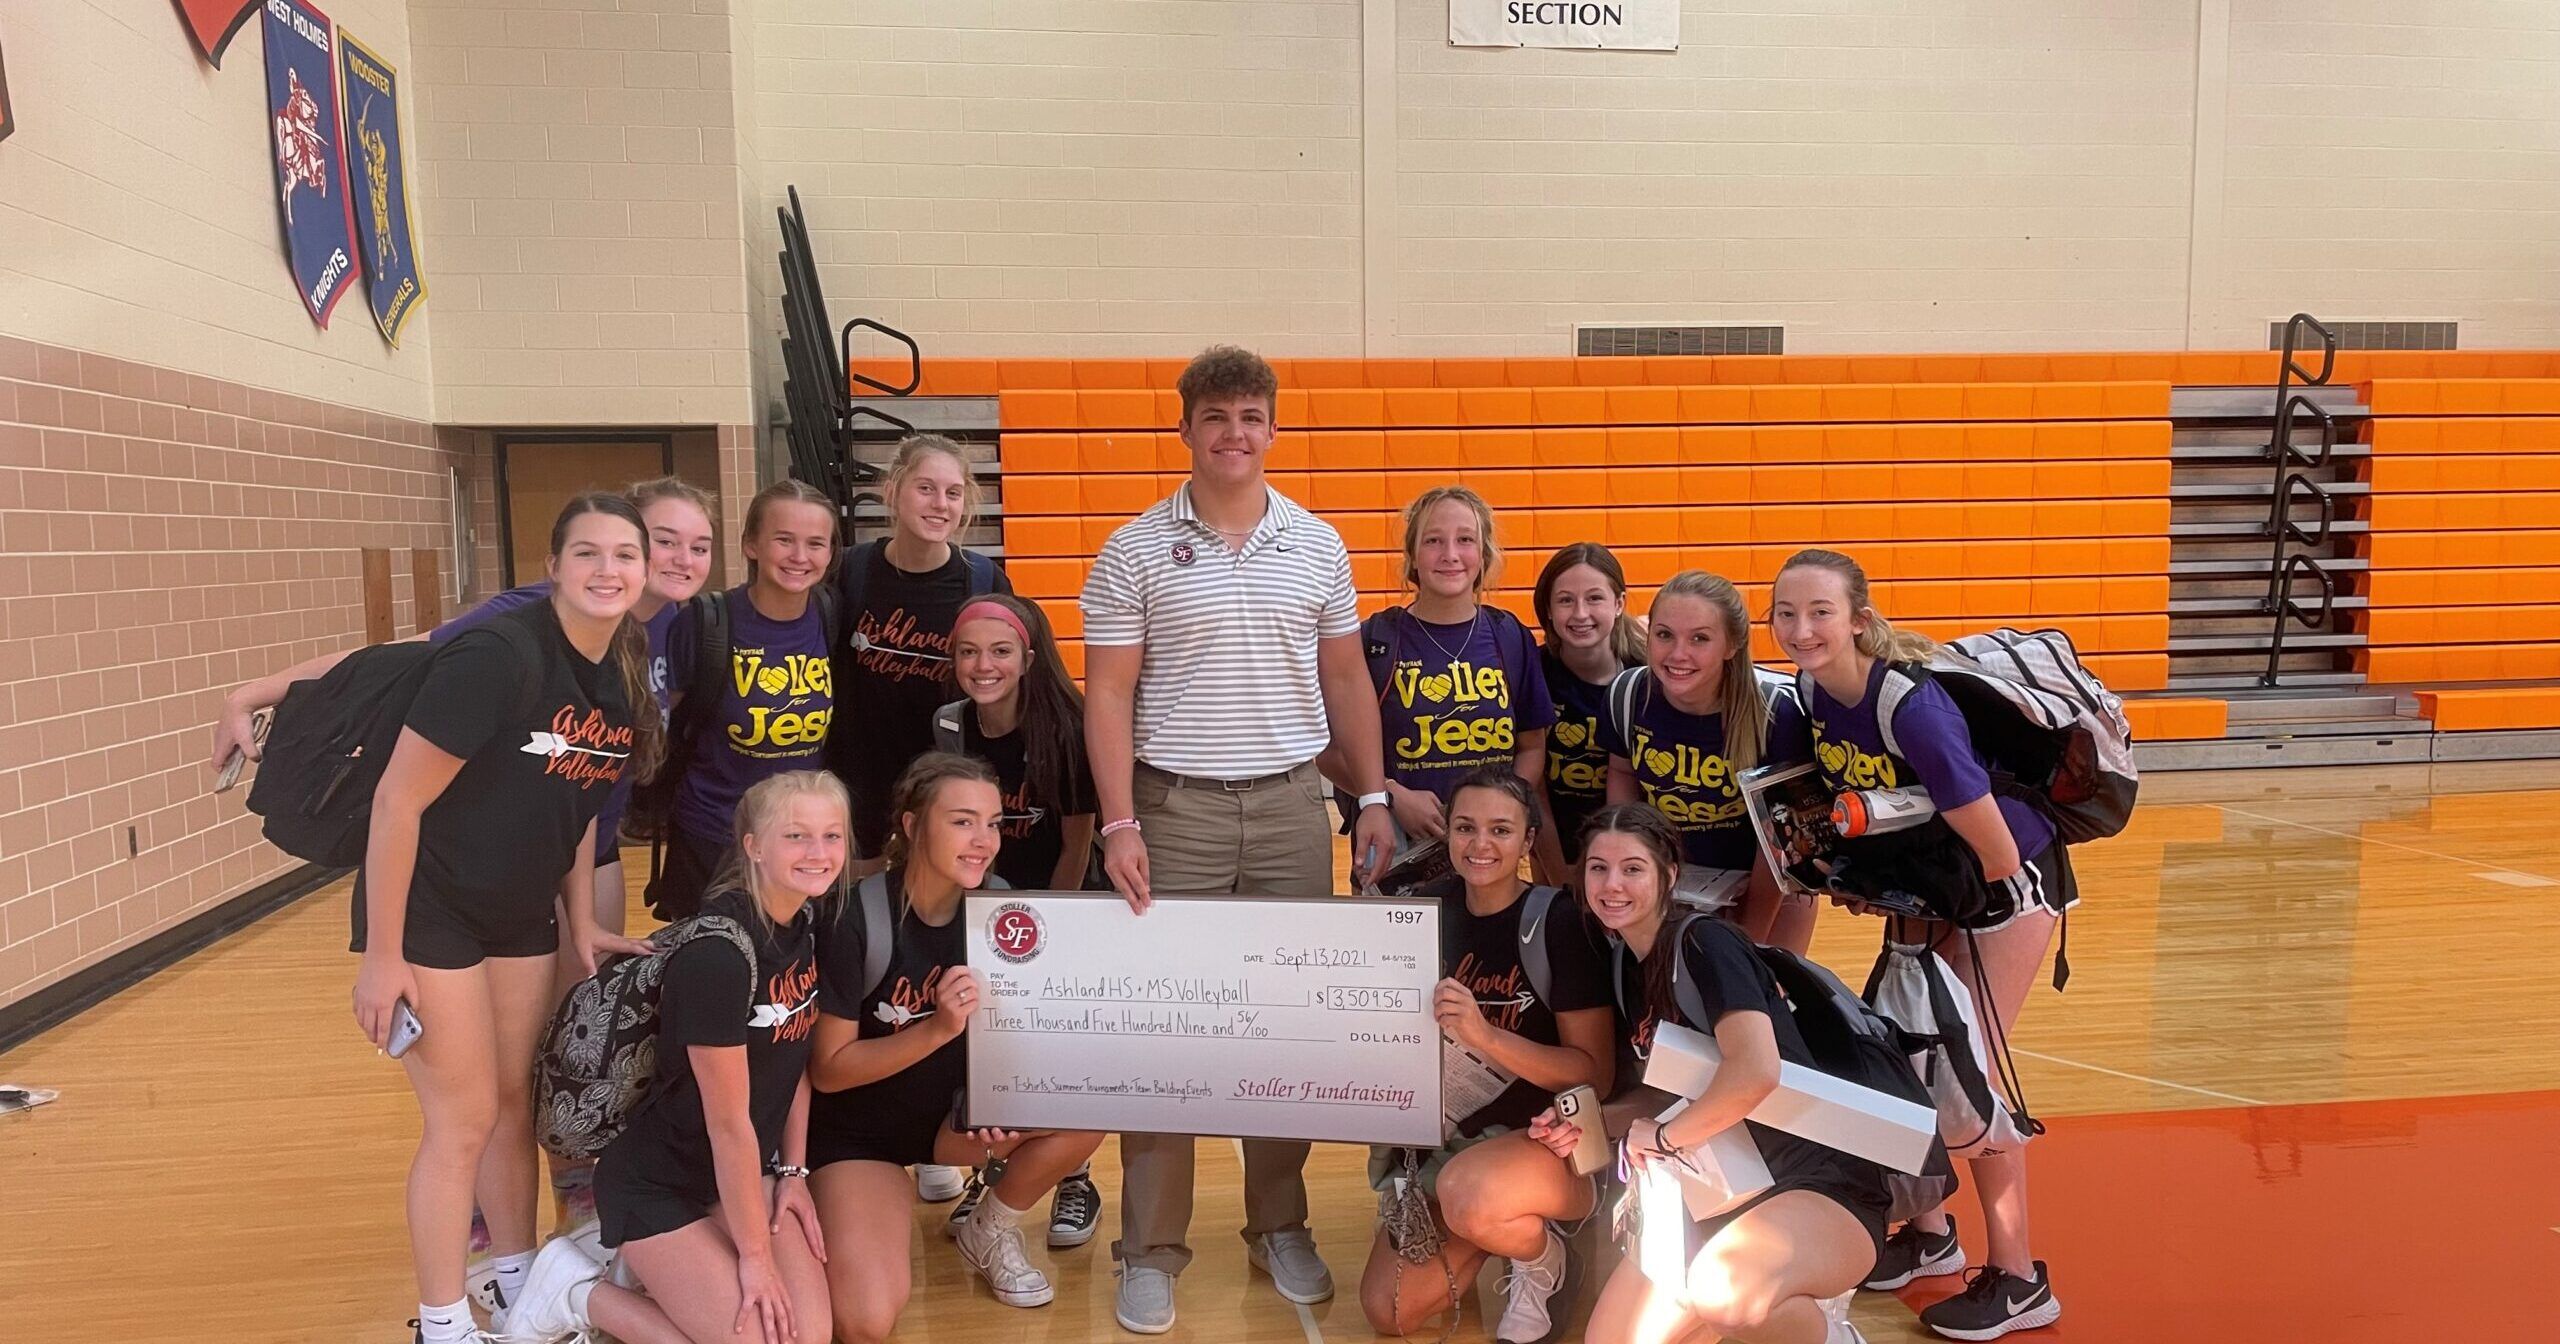 Ashland volleyball fundraising delivery check